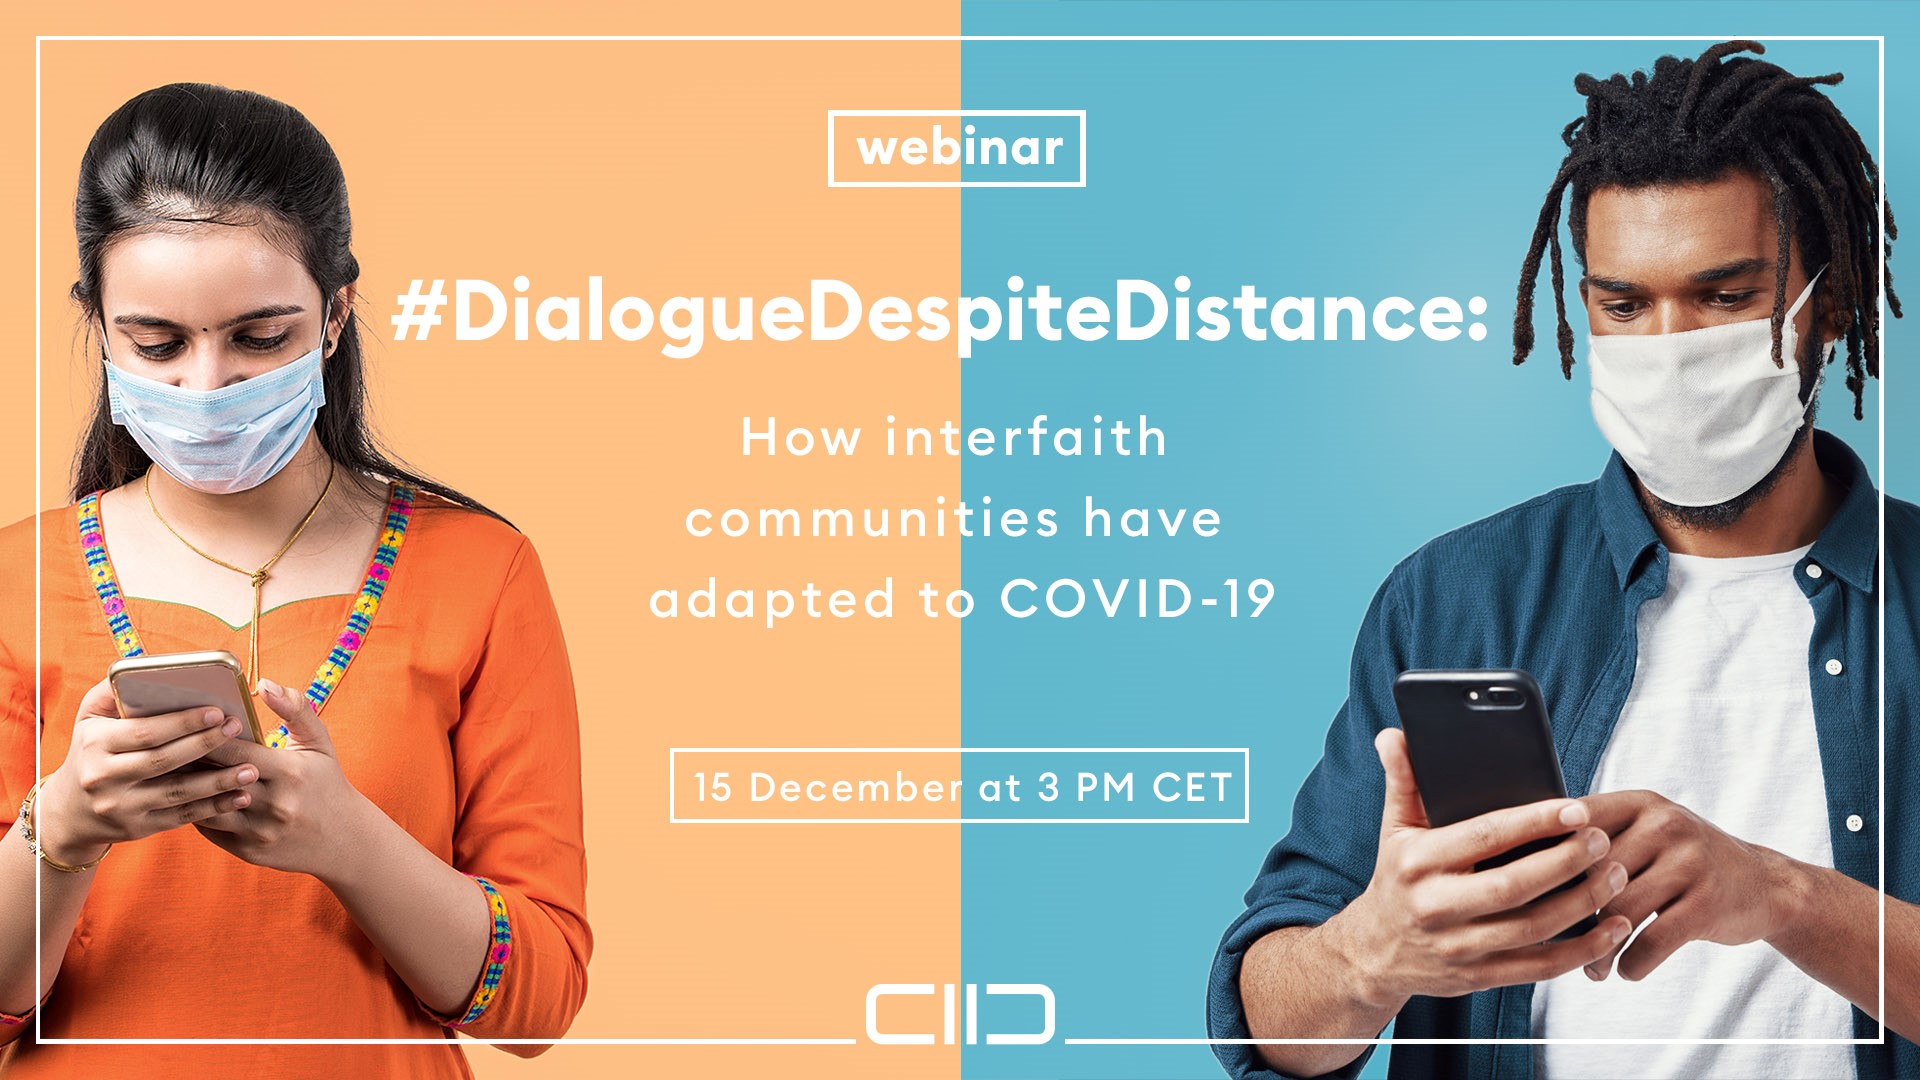 #DialogueDespiteDistance: Resources for Combatting COVID-19